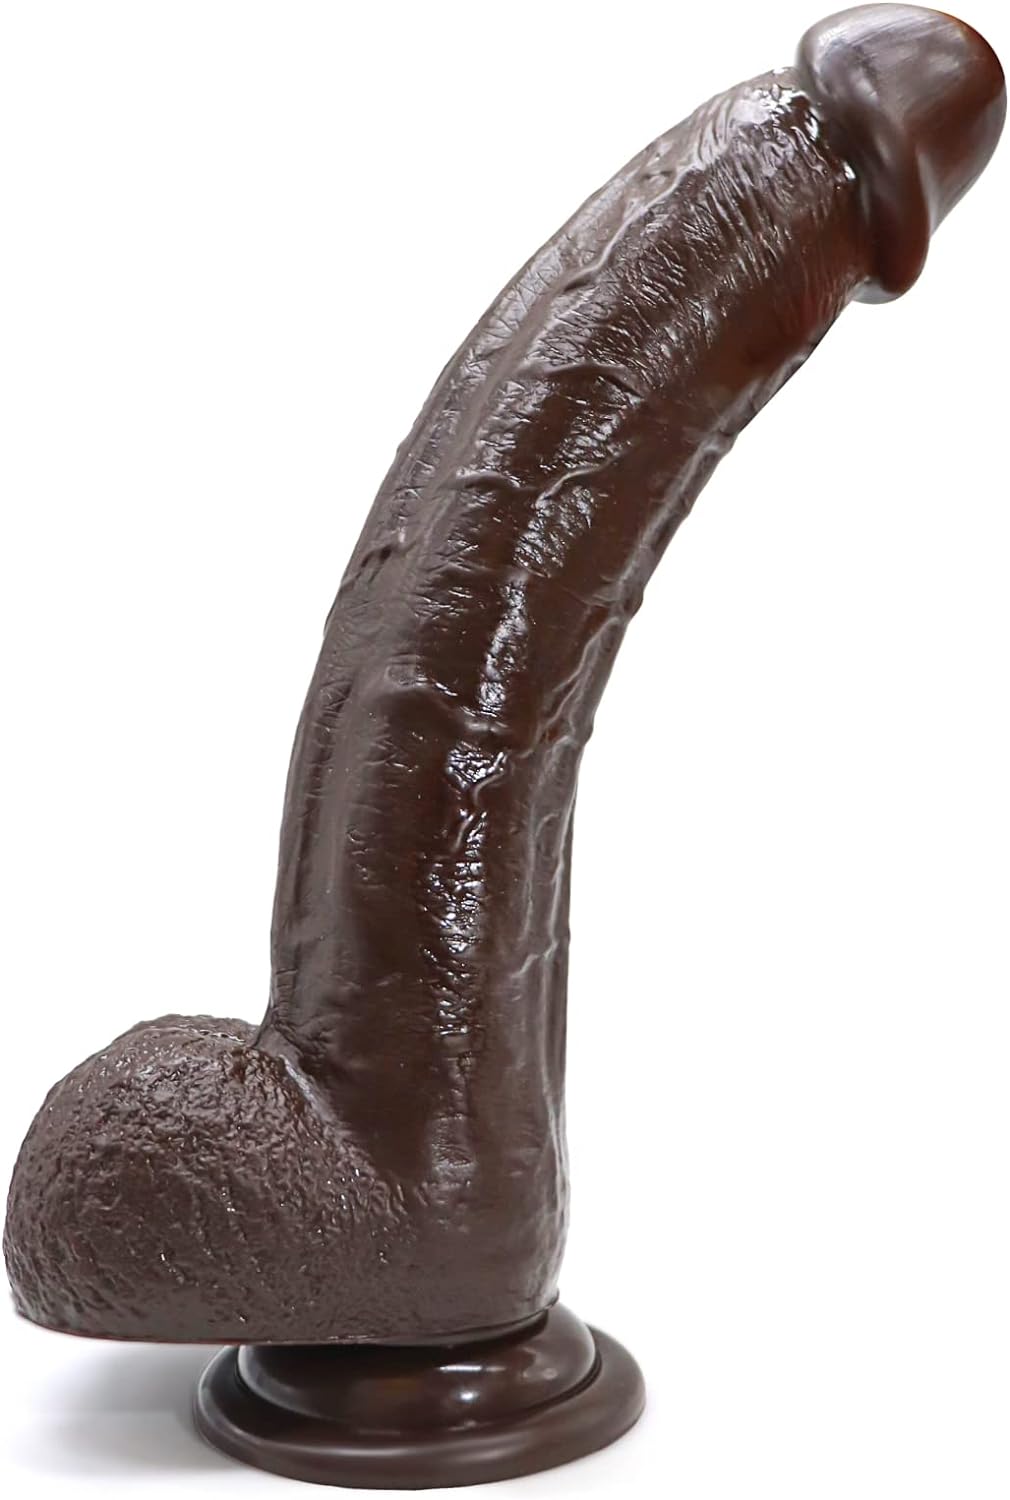 9.25 Inch Realistic Silicone Anal Dildo Adult Sex Toys for Women, G Spot Stimulator with Strong Suction Cup for Hands-Free Play, Body-Safe Material Curved Shaft and Balls Lifelike Flexible,Brown